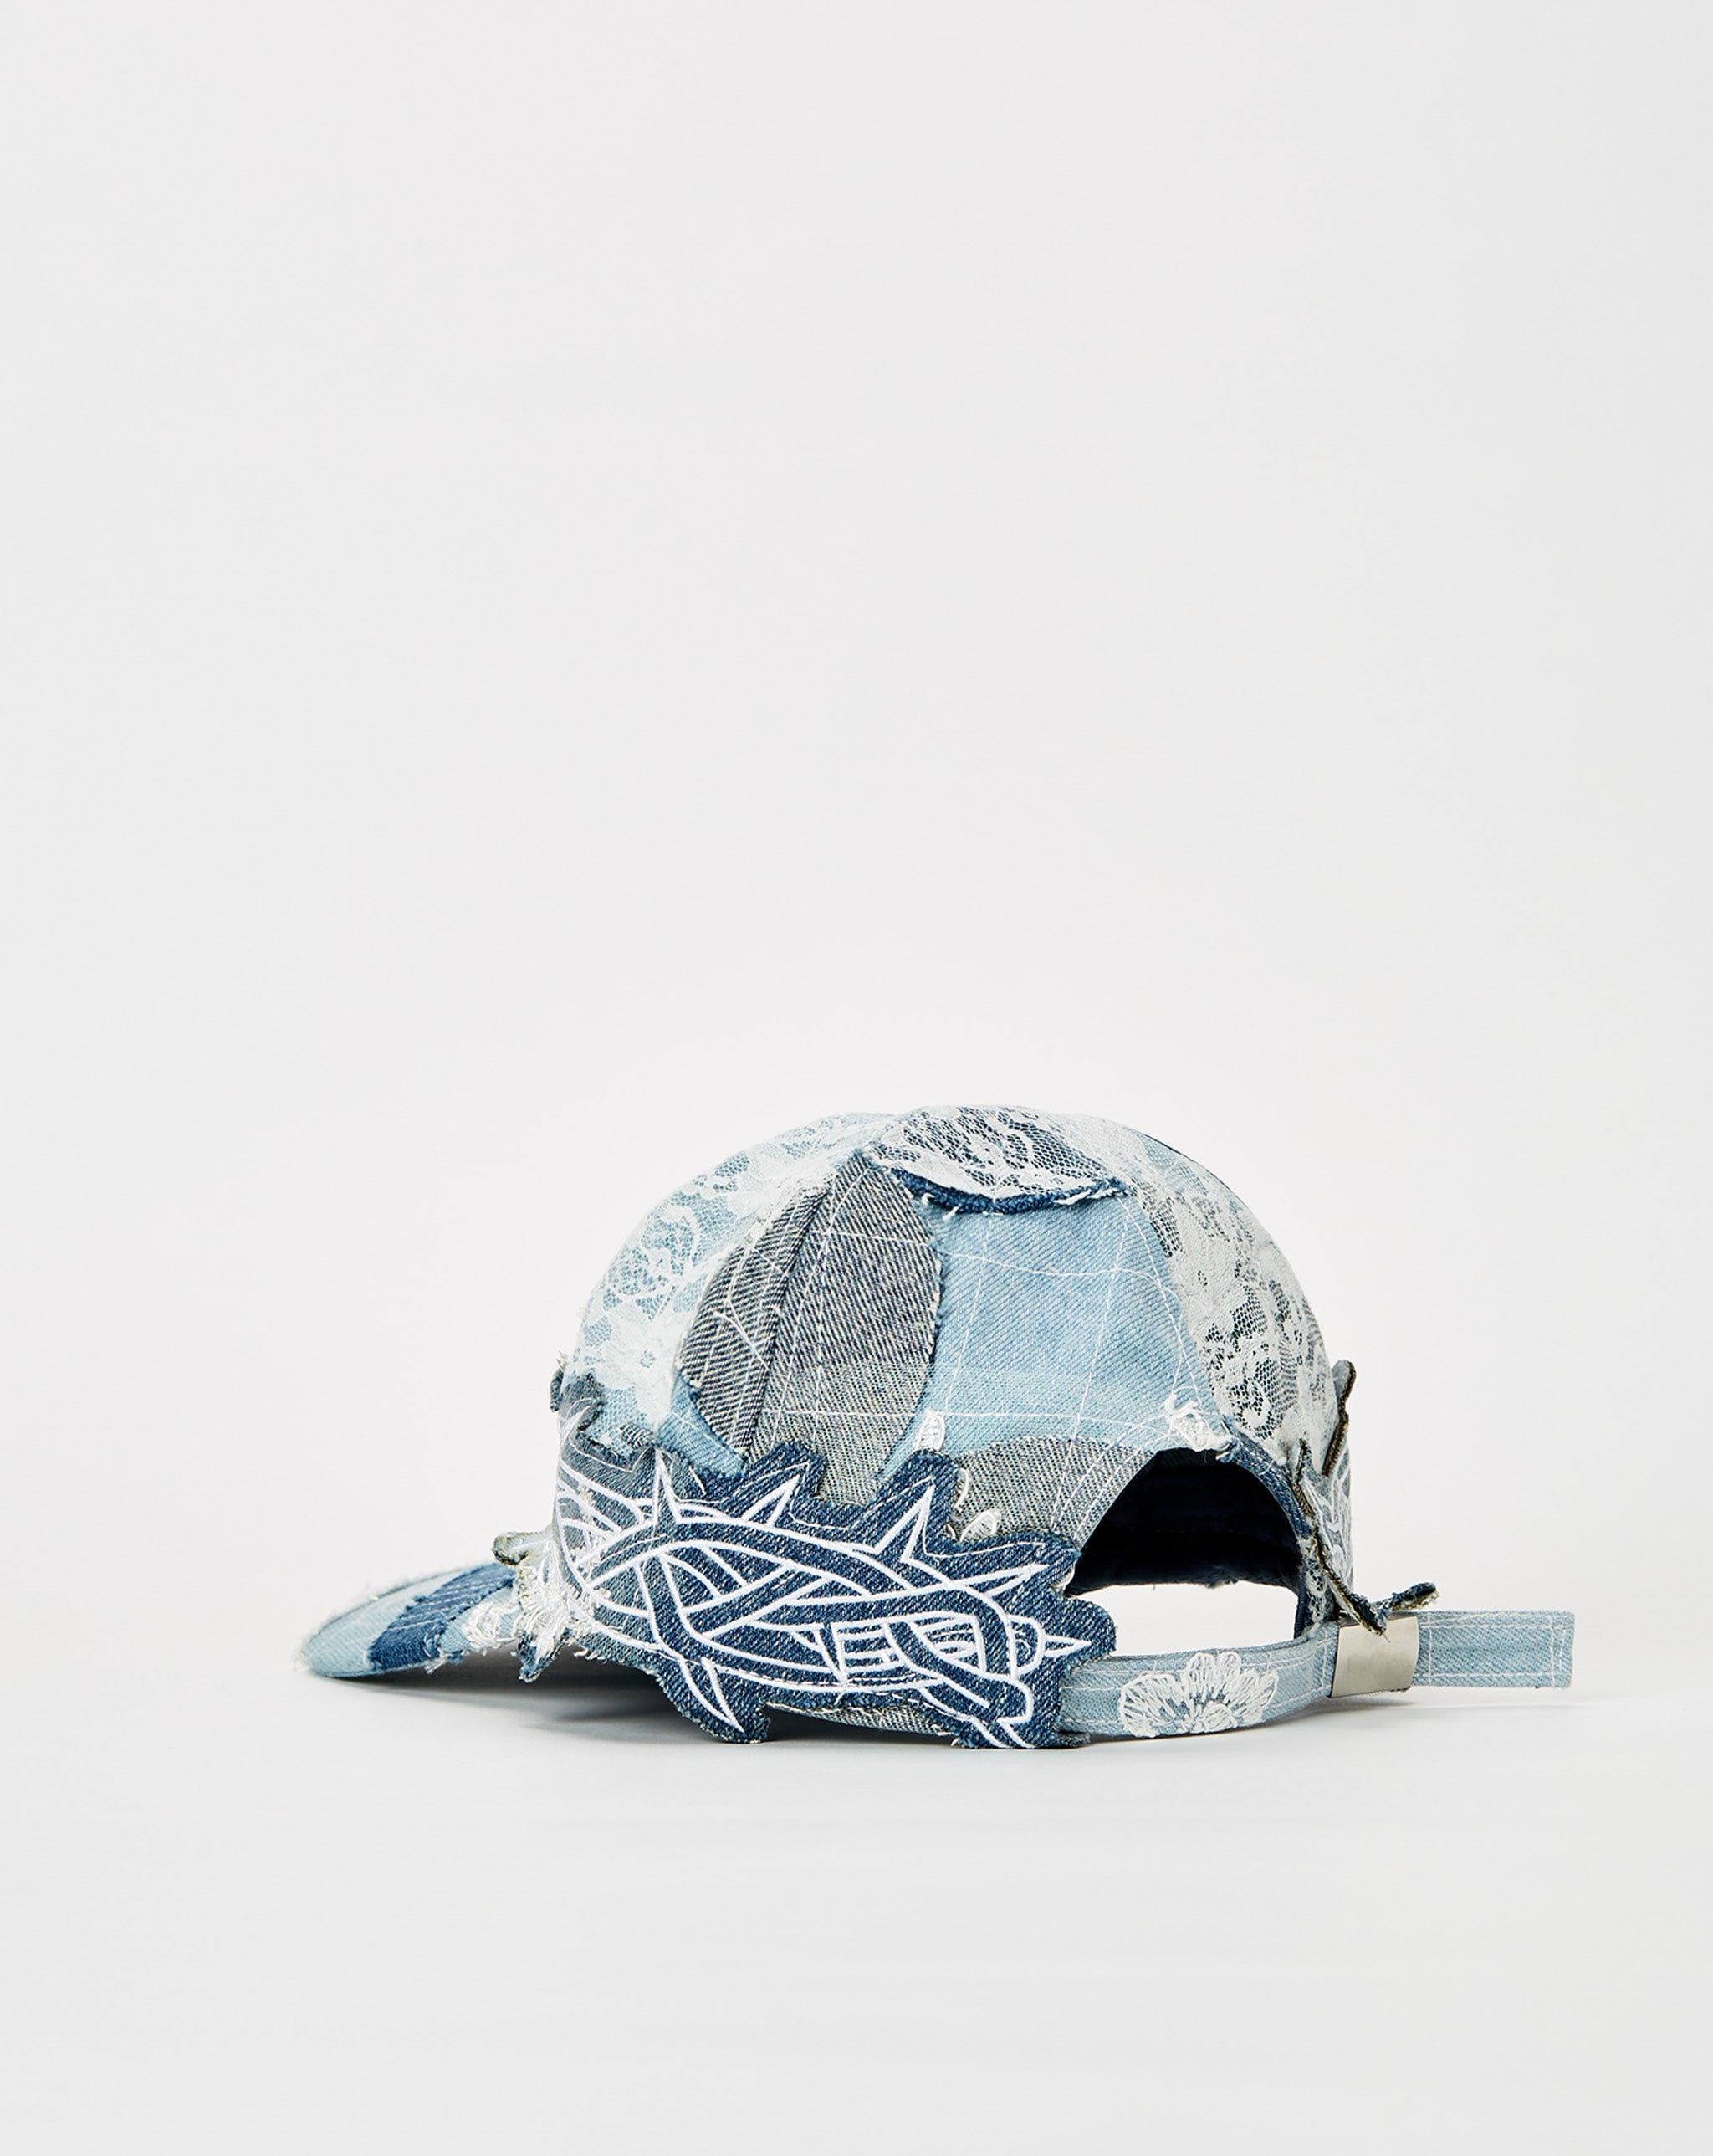 Thorn Wrapped Grid Bucket Hat Thorn Grid Cap  - Cheap Cerbe Jordan outlet